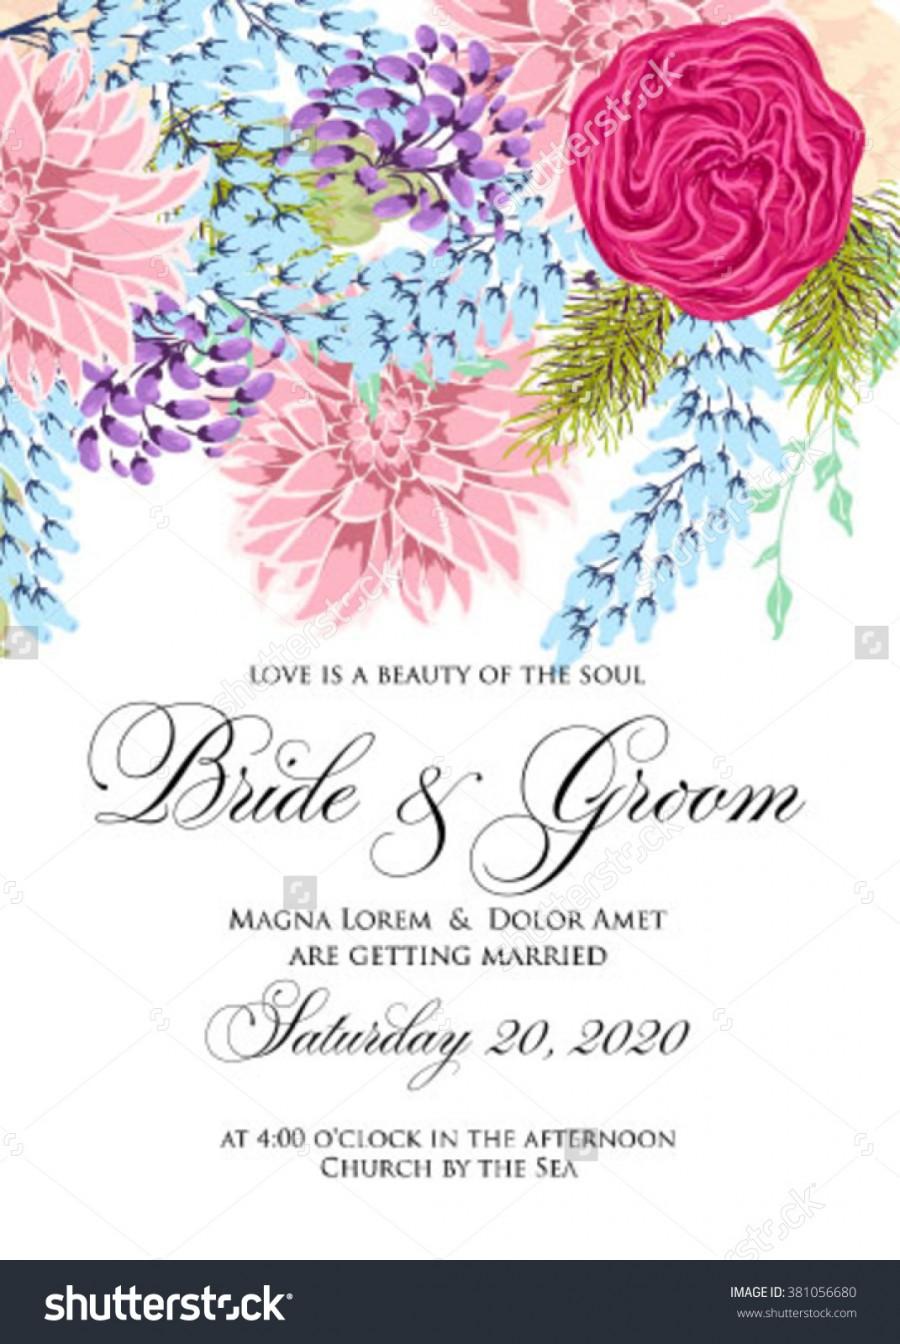 Mariage - Wedding card or invitation with chrysanthemum flowers on striped background